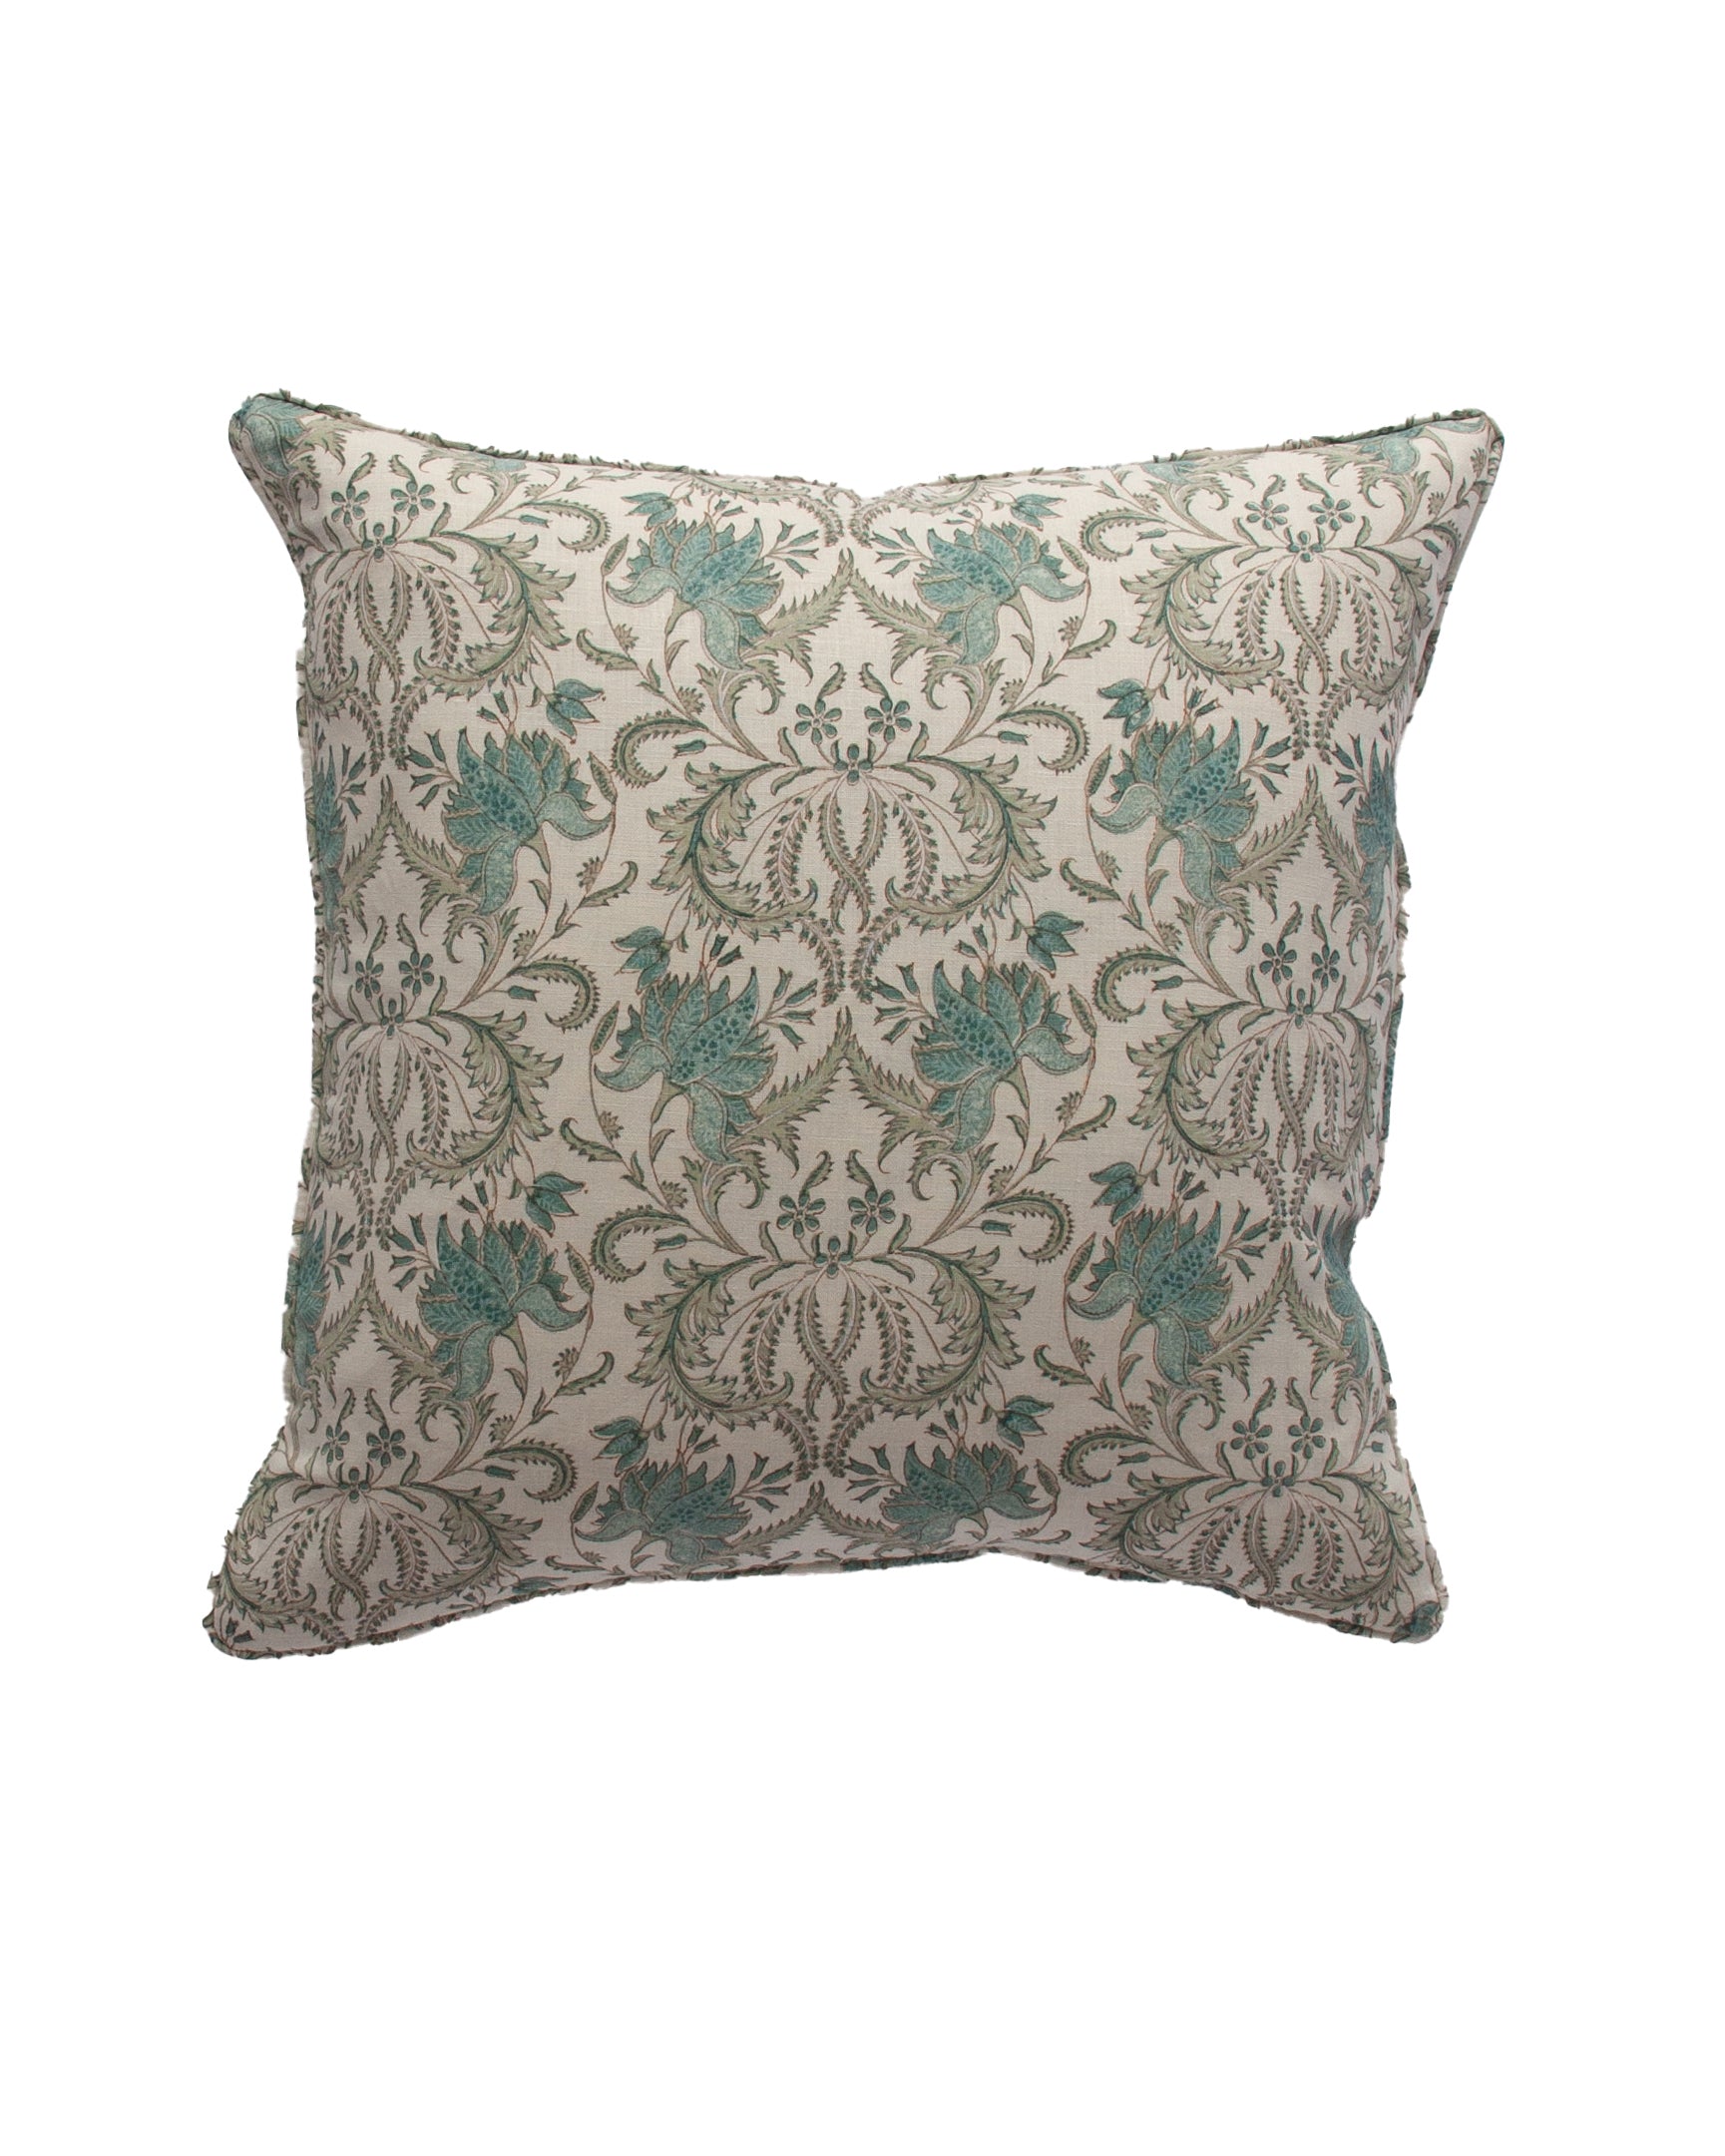 The Blakely Square Cushion